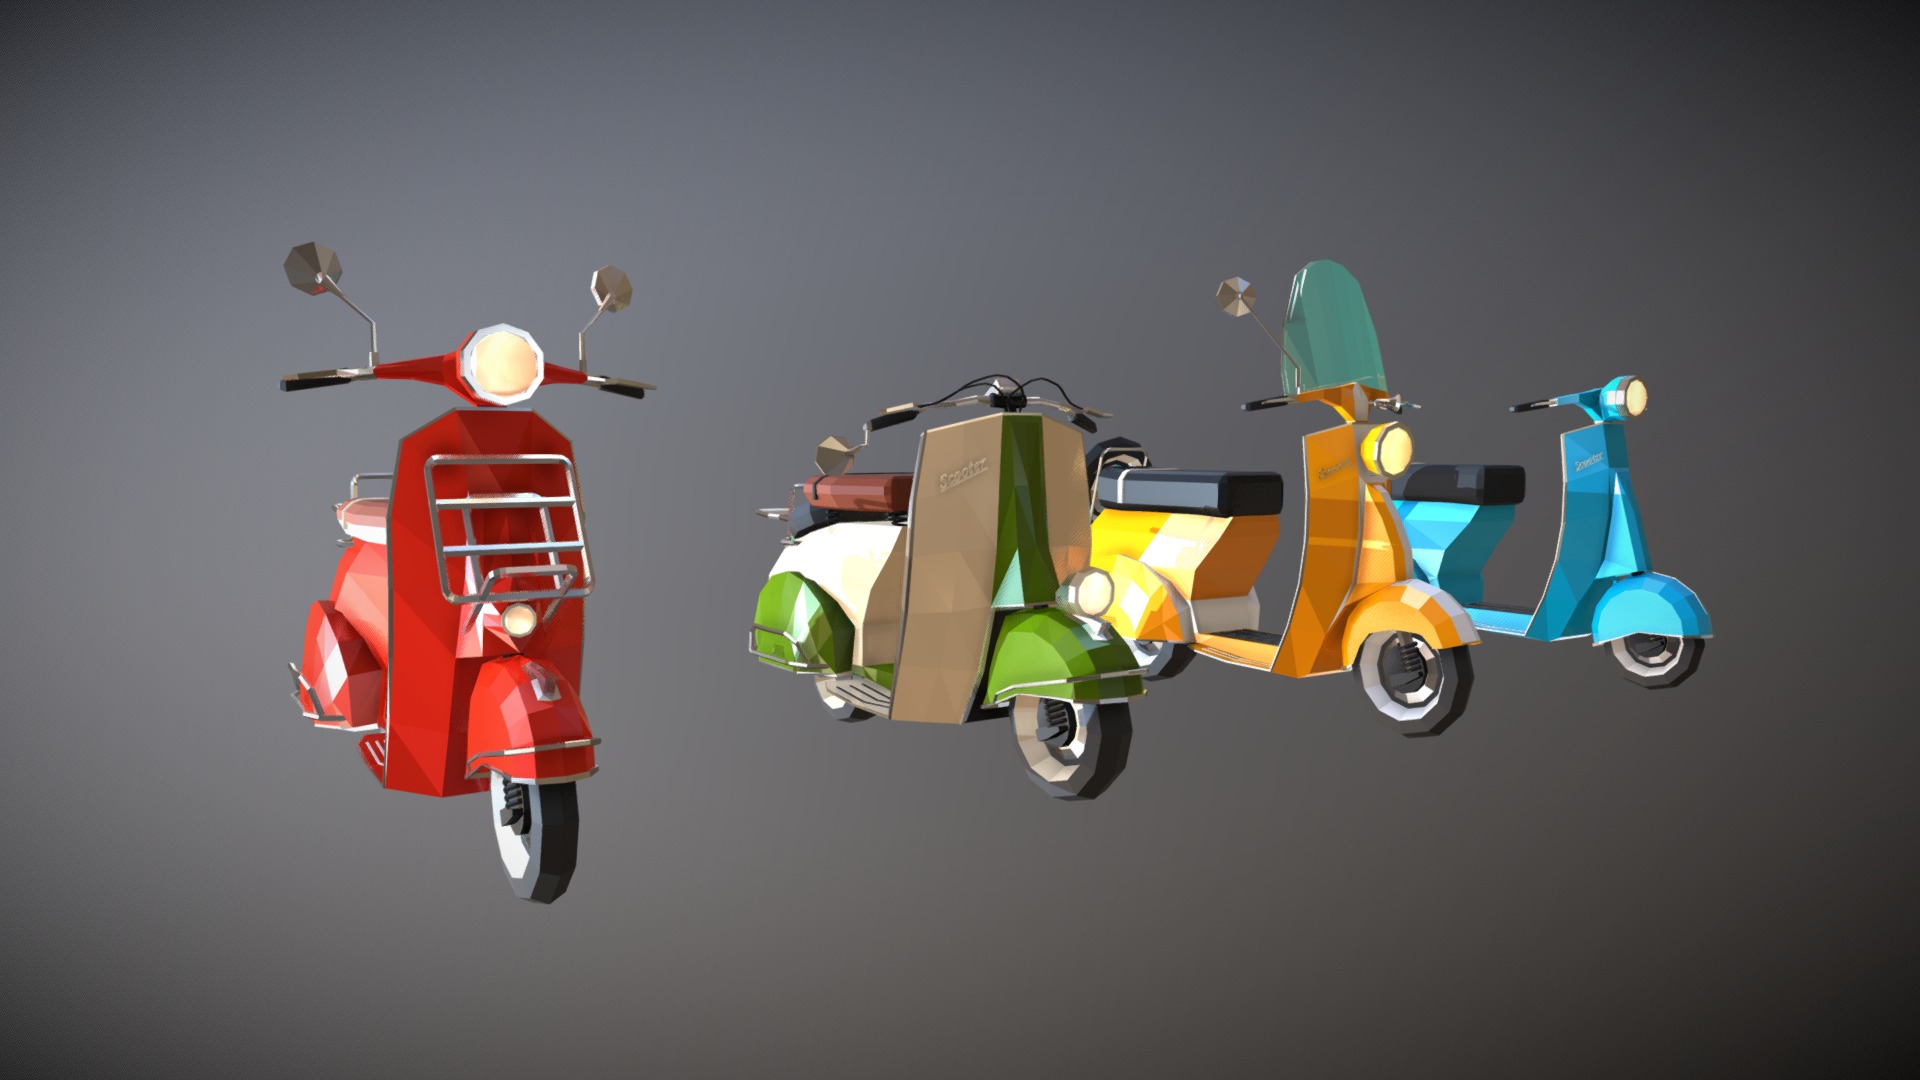 ● consists of:





Low Poly Scooter 01




Low Poly Scooter 02




Low Poly Scooter 03




Low Poly Scooter 04



● available exchange formats: OBJ, FBX, 3DS

● ready to use for Virtual Reality, Augmented Reality and Game applications

● clean meshes 

Have fun with this collection :) - Low Poly Scooter Pack - Buy Royalty Free 3D model by Linder-Media 3d model